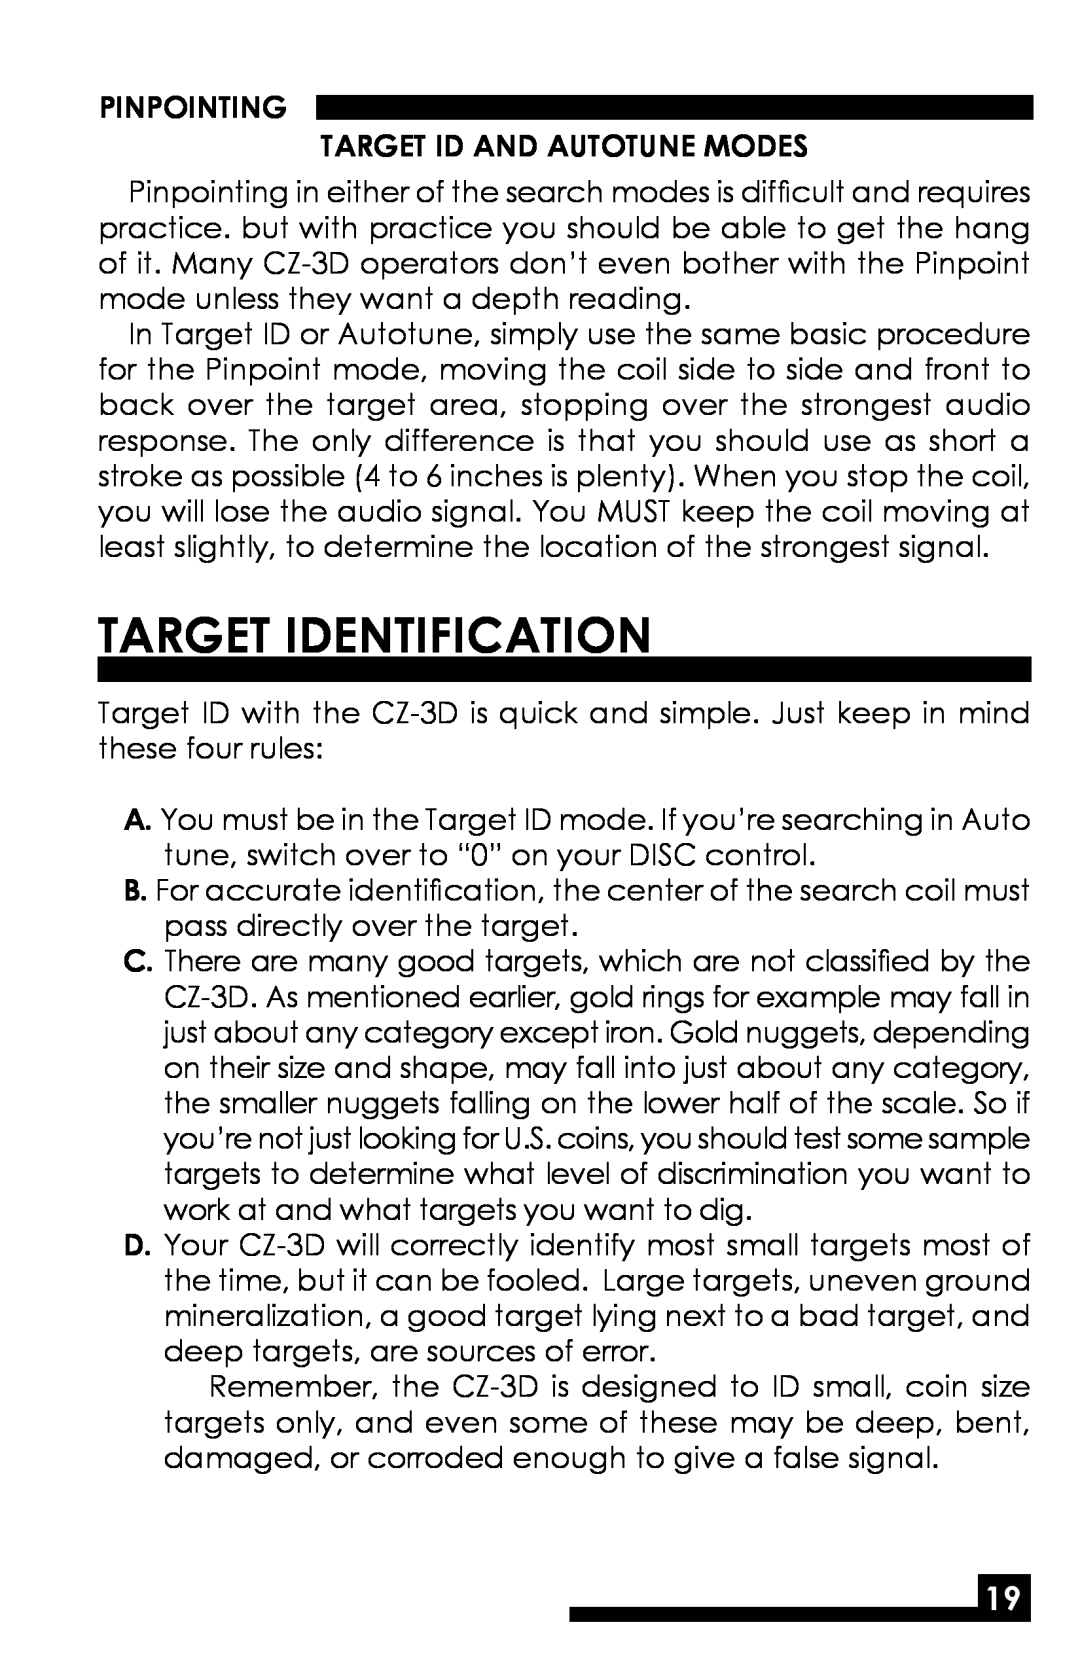 Fisher CZ-3D manual Target Identification, Pinpointing Target Id And Autotune Modes 